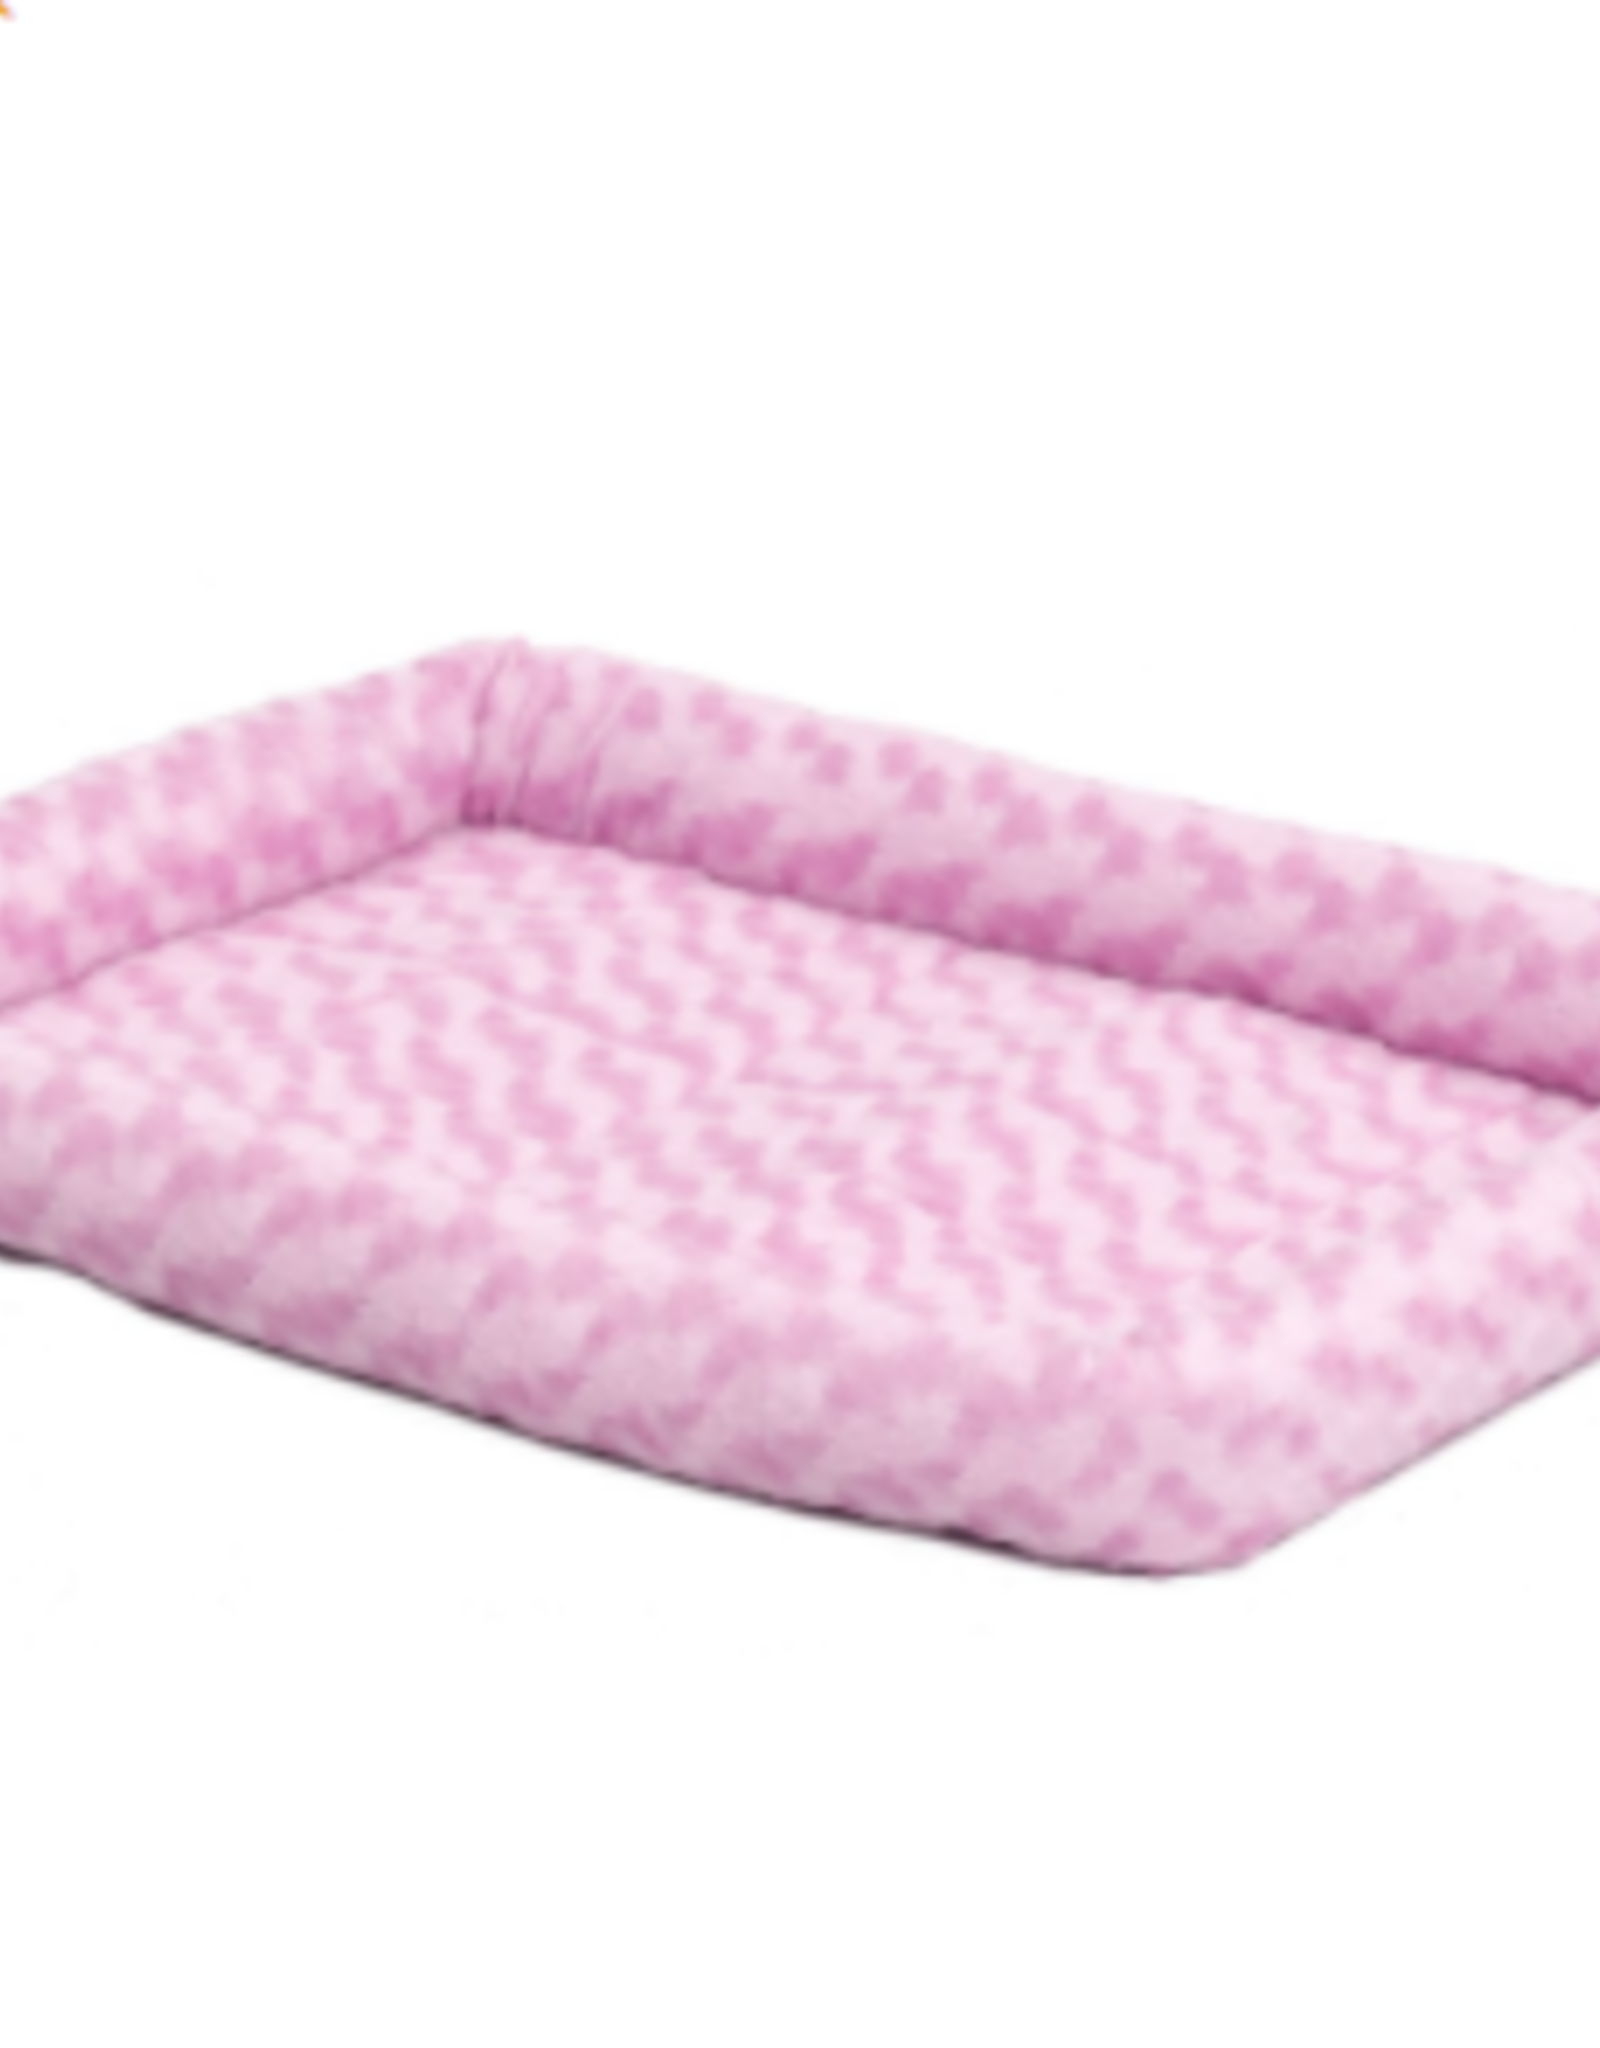 MIDWEST PET PRODUCTS QUIET TIME FASHION BED PINK 24X18